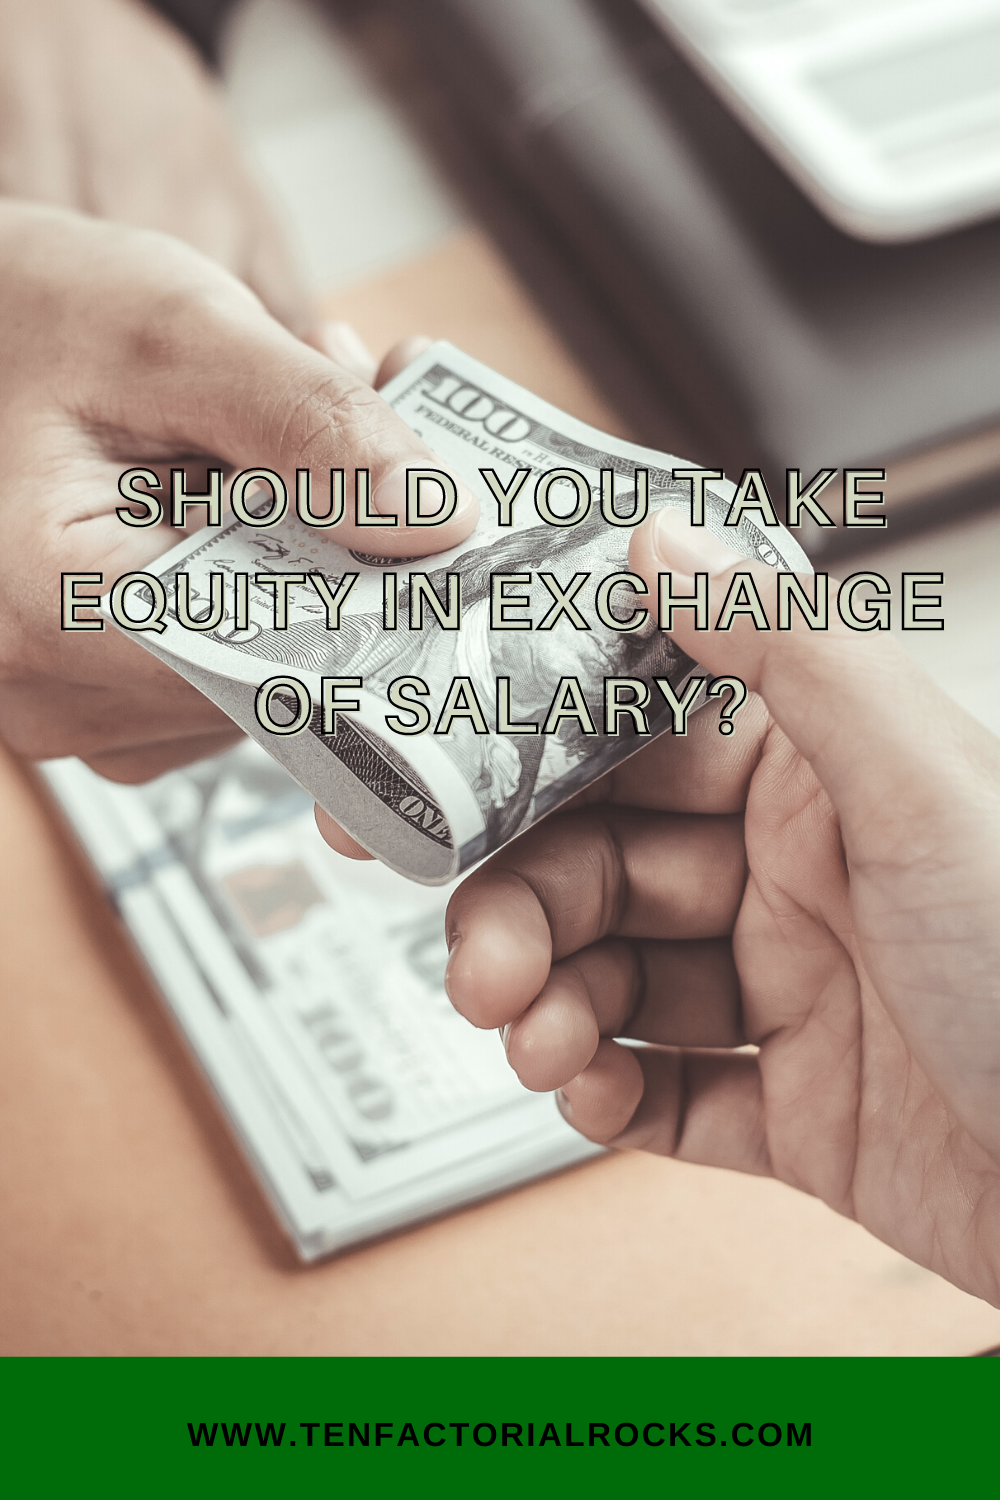 Should You Take Equity in Exchange of Salary